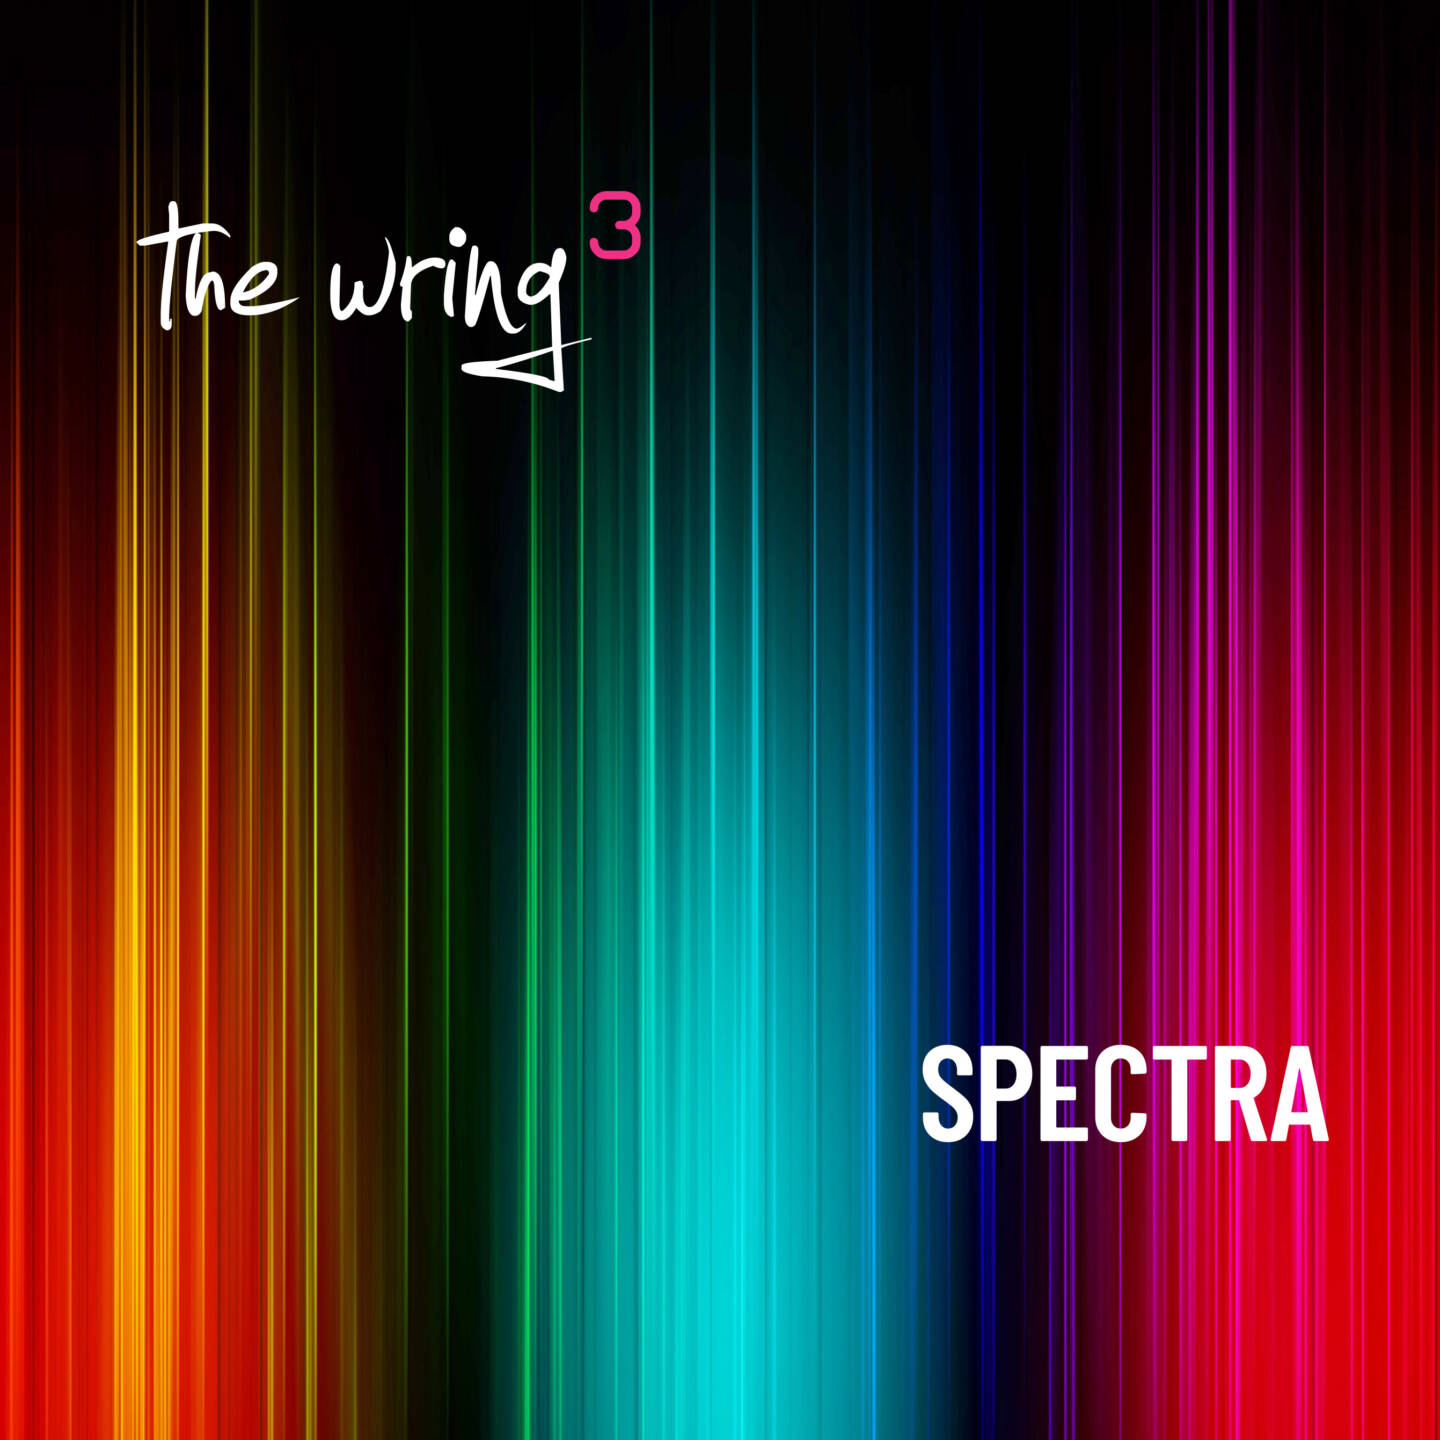 Cover_TheWring3_Spectra